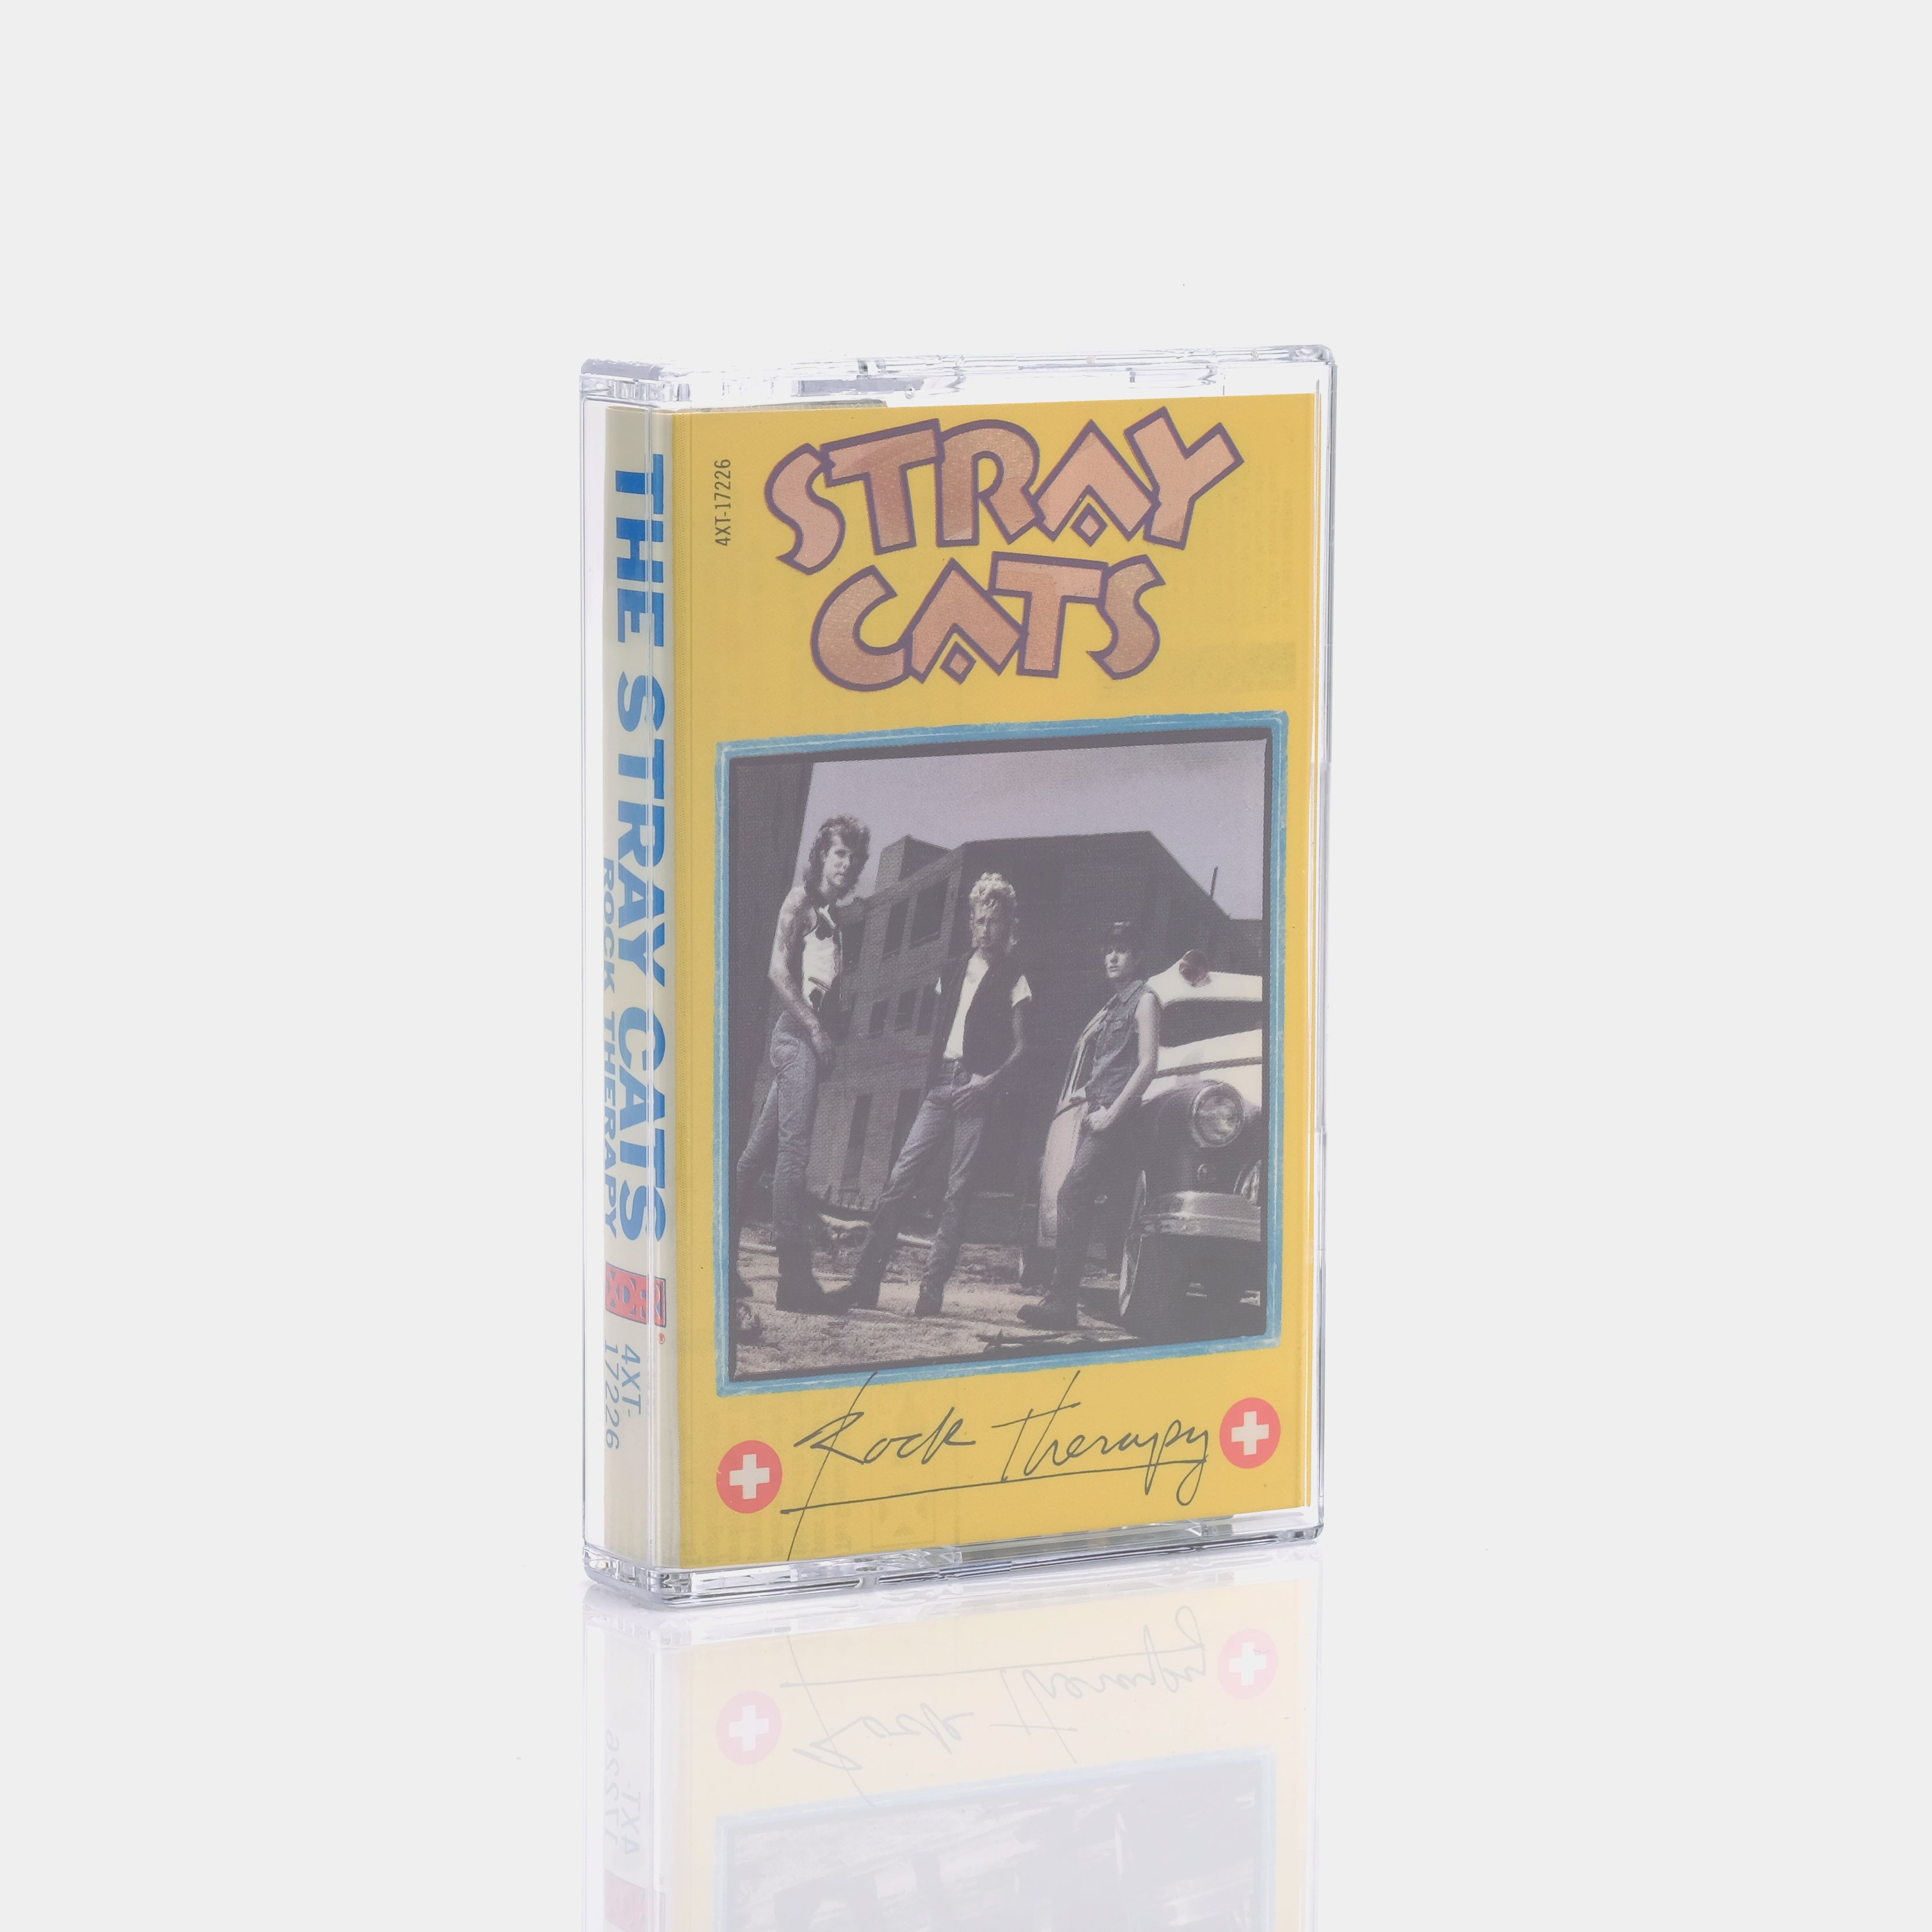 Stray Cats - Rock Therapy Cassette Tape